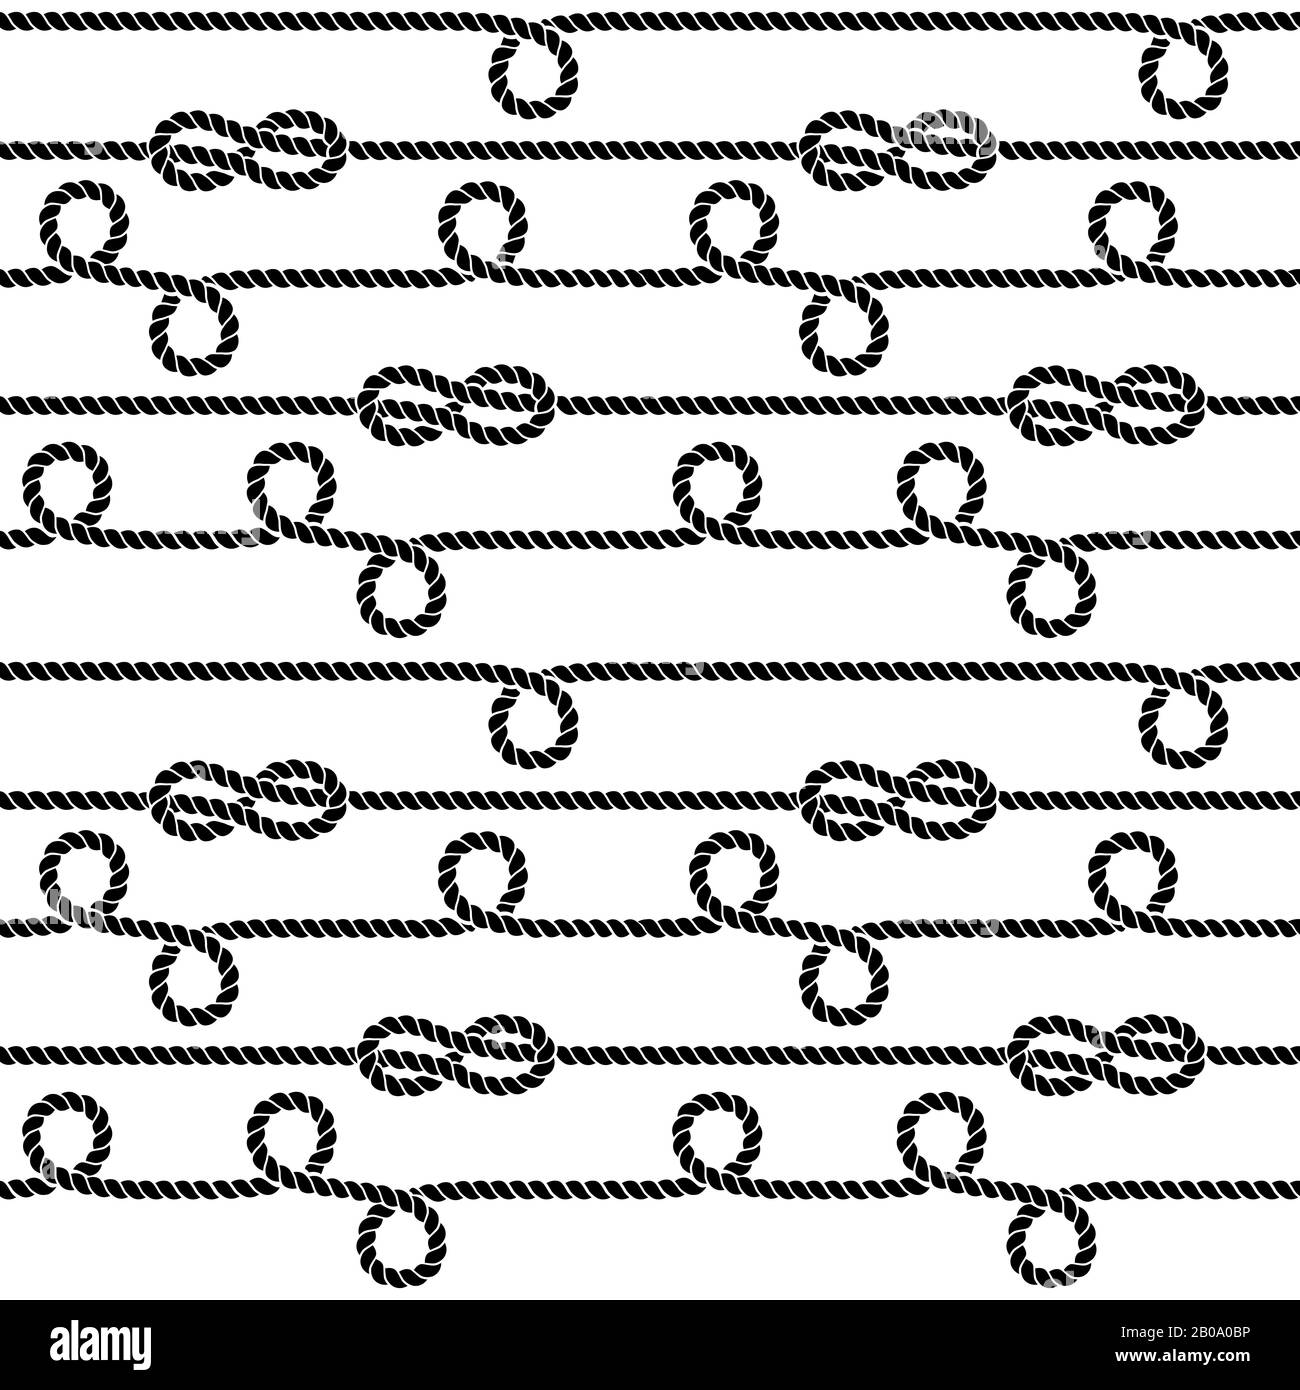 Nautical ropes and knots vector seamless pattern. Marine string illustration Stock Vector